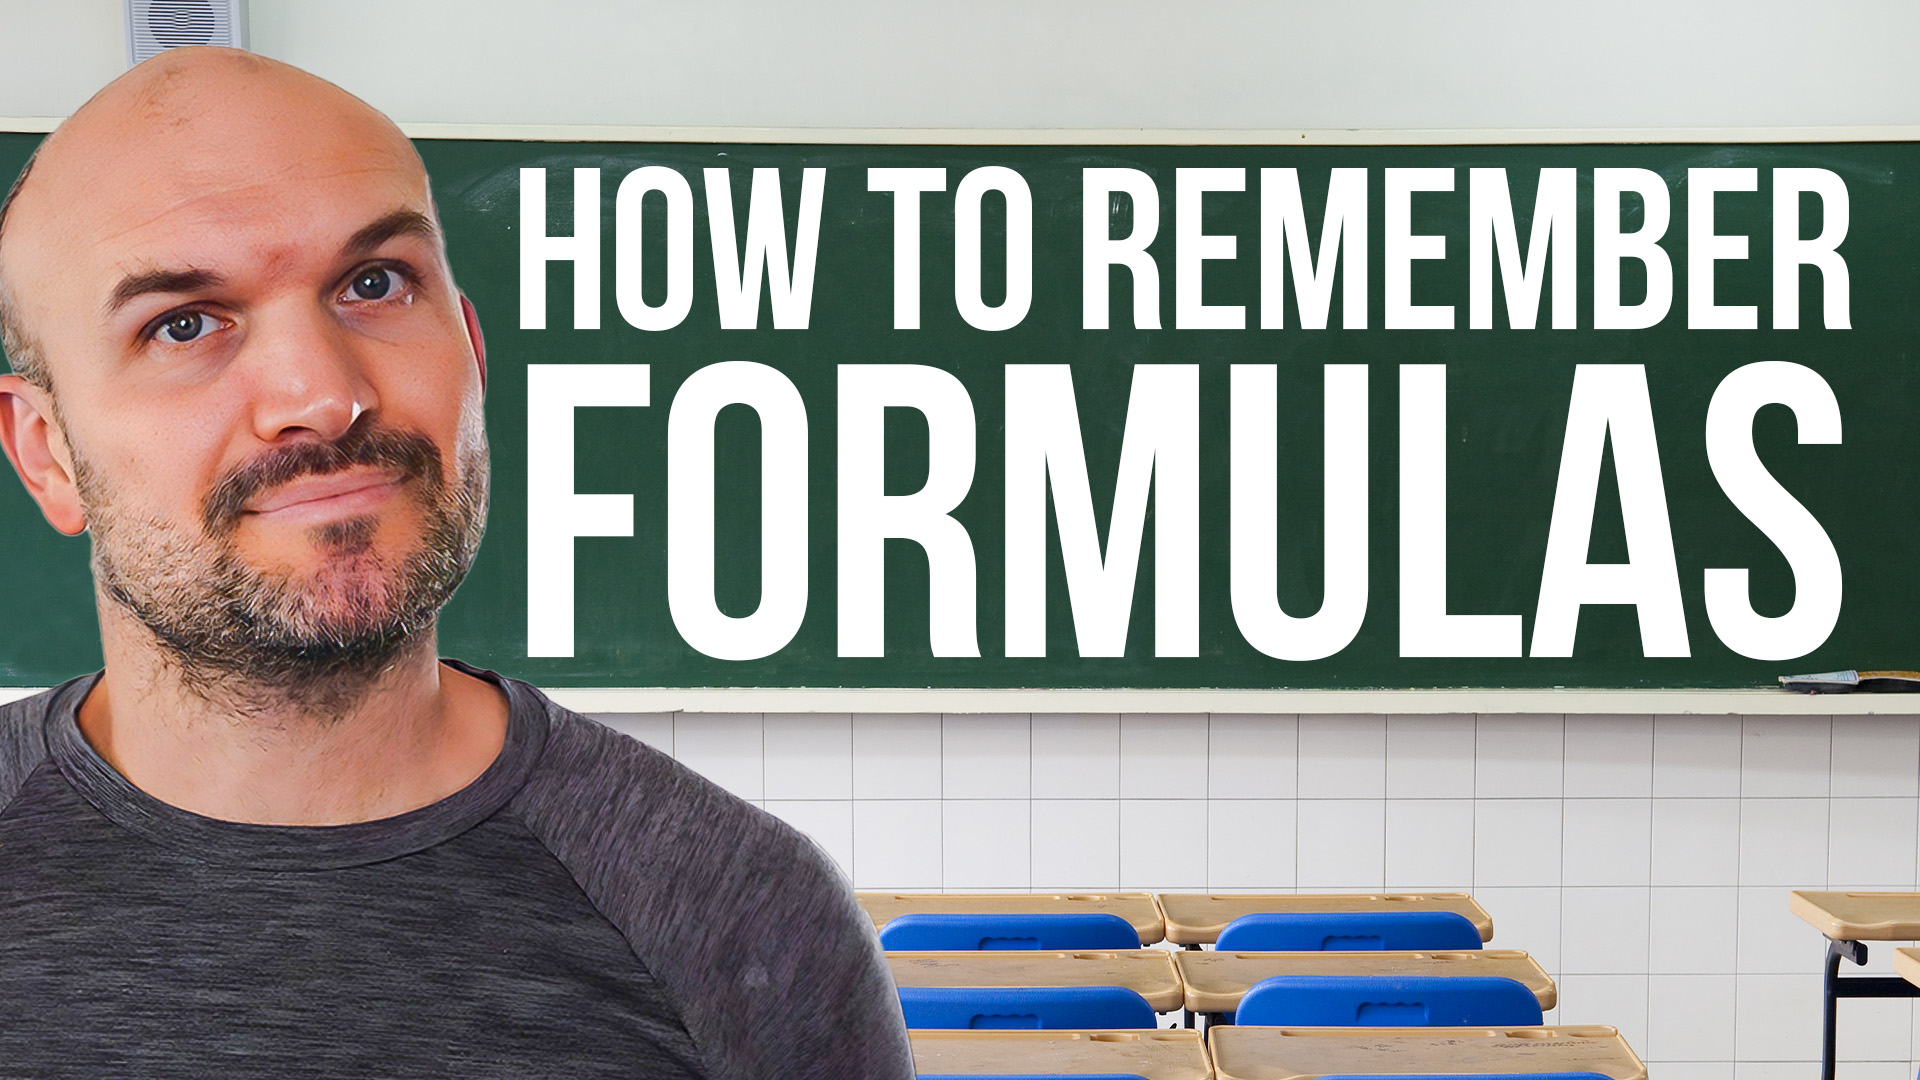 Featured image for “How to Remember Formulas On Your Exam”